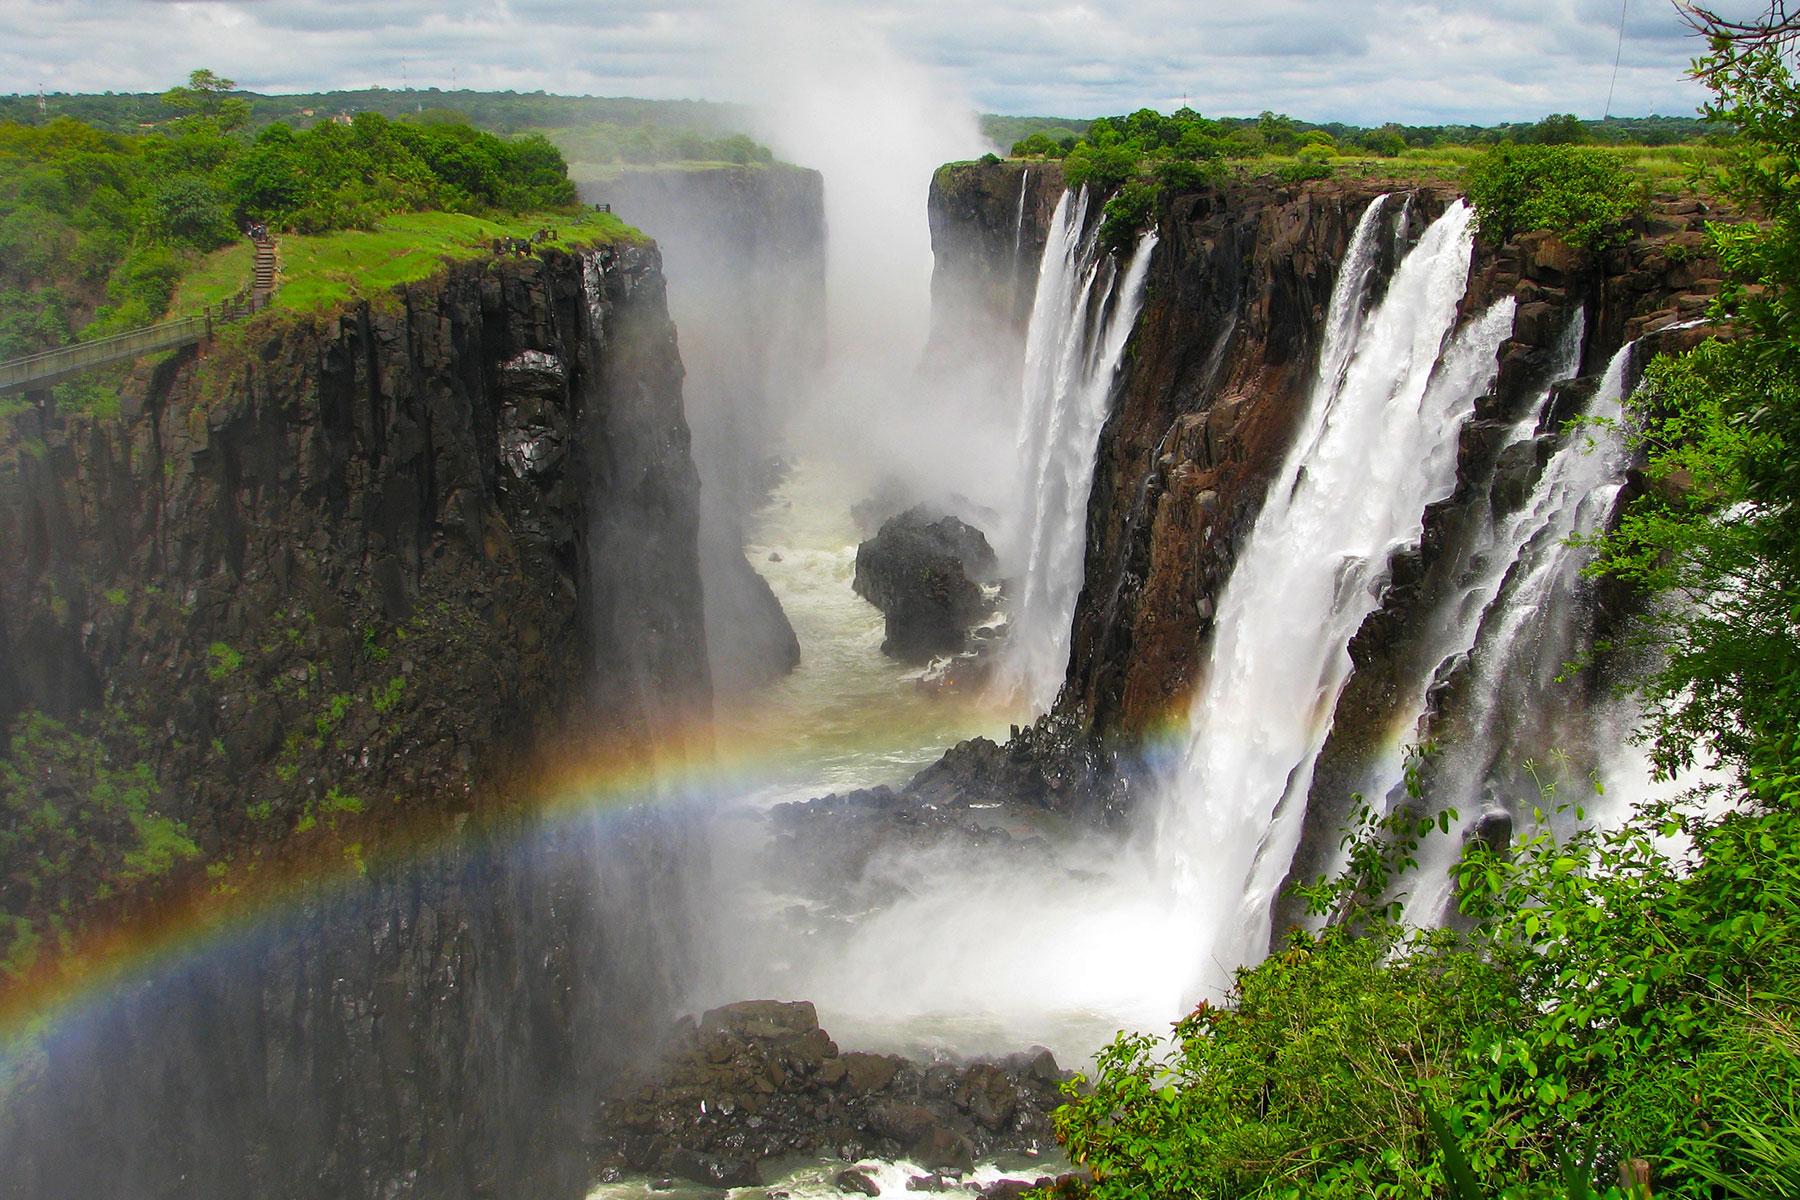 About Victoria Falls